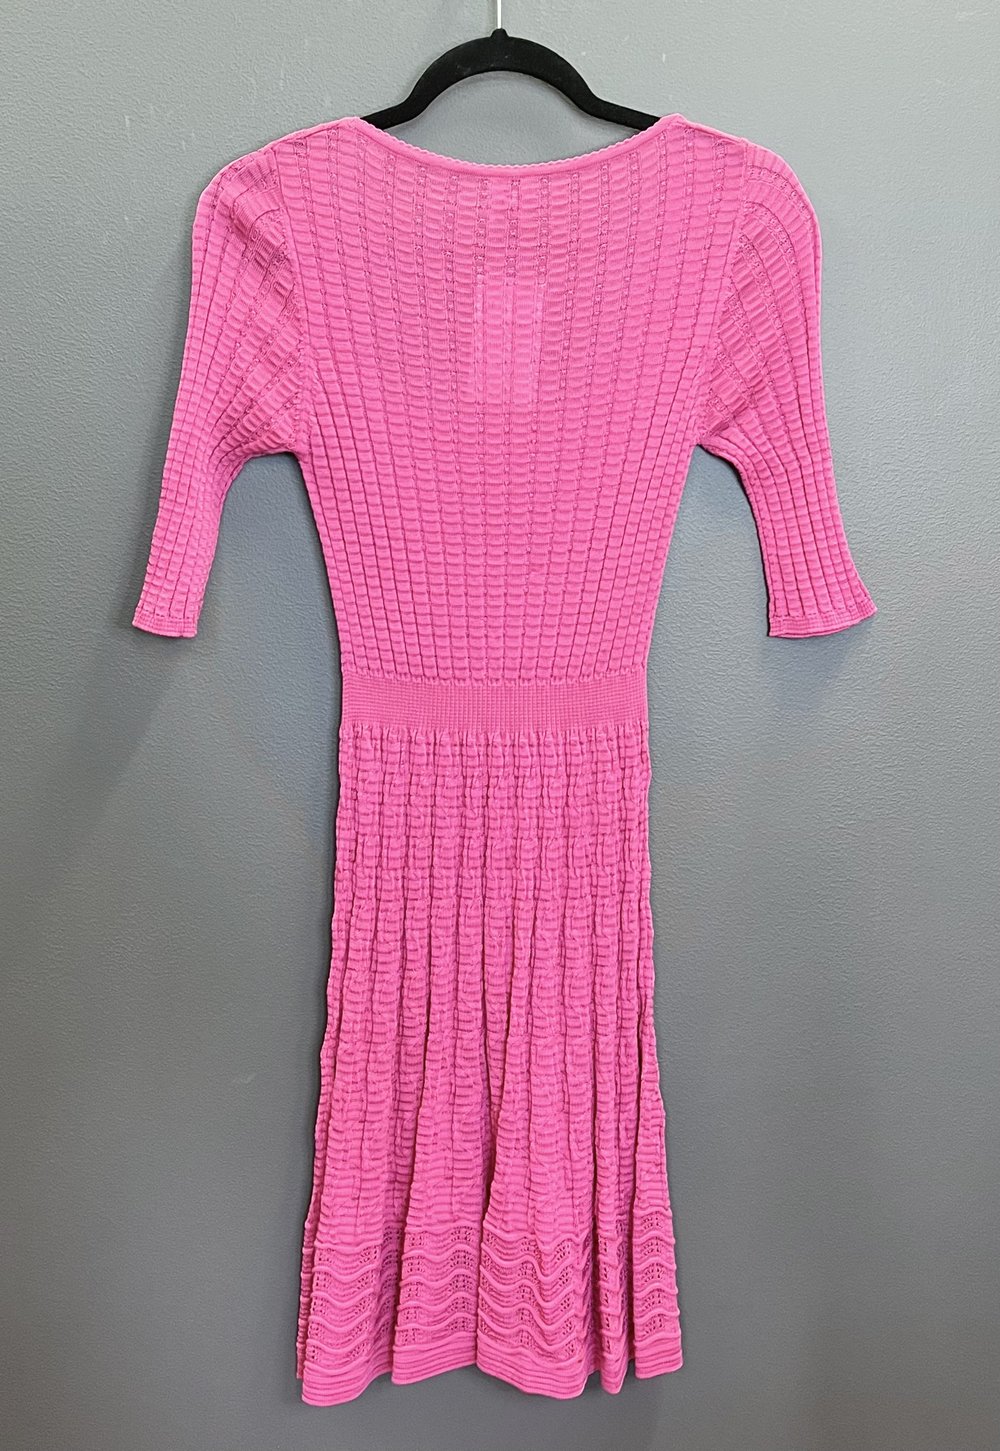 M Missoni Dress — Recycled Chic Boutique